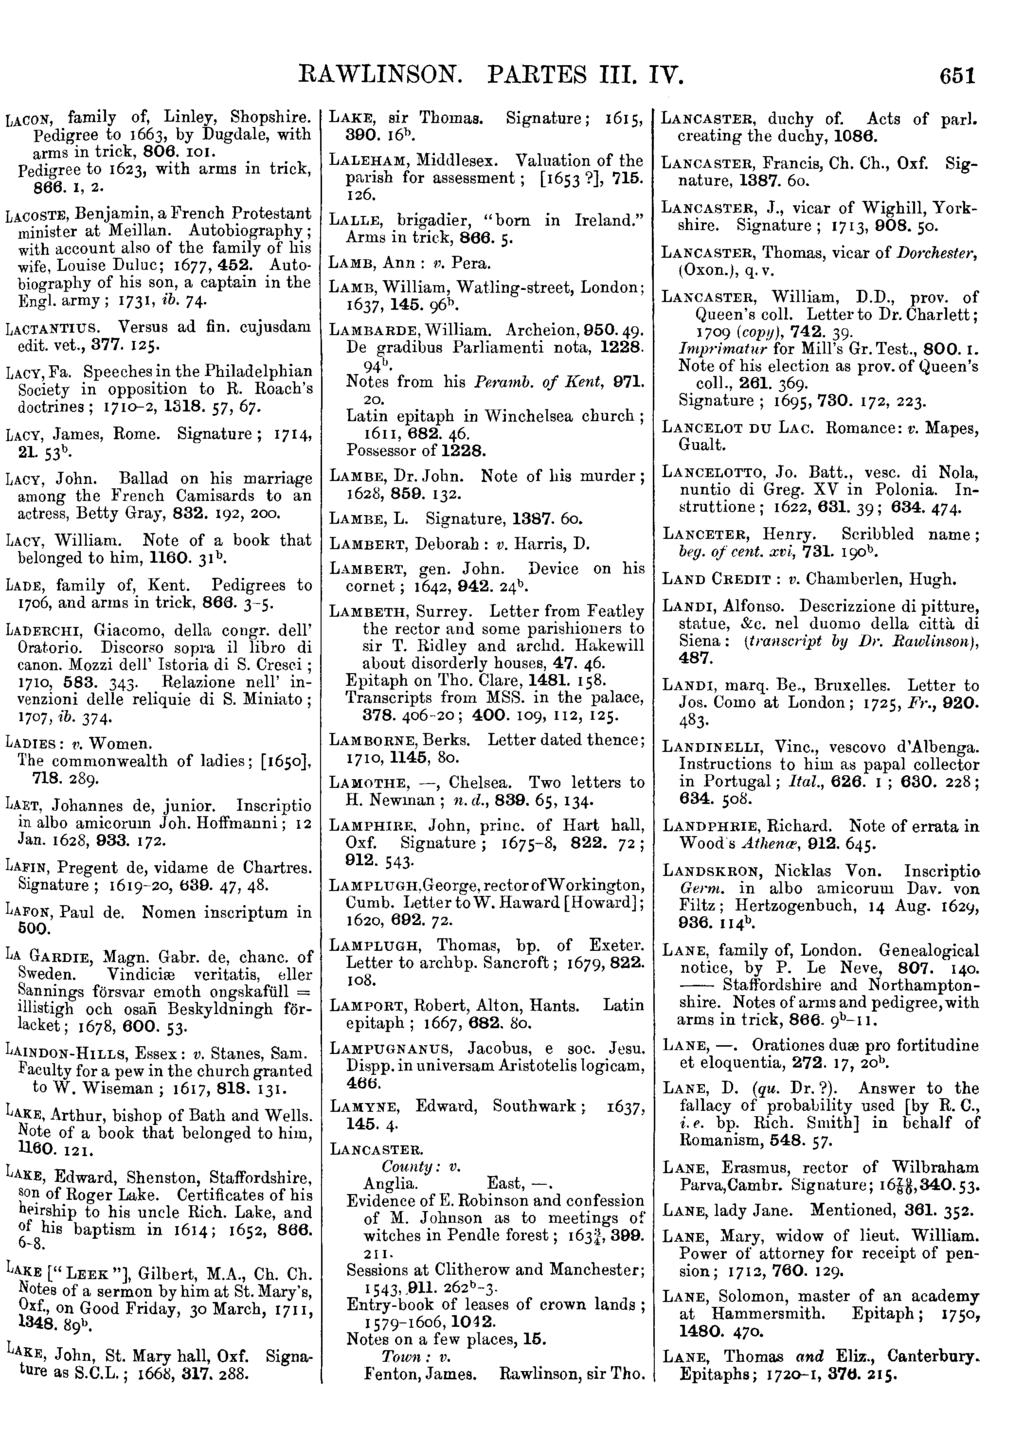 LACON, family of, Linley, Shopshire. Pedigree to 1663, by Dugdale, with arms in trick, 806. 101. Pedigree to 1623, with arms in trick, 866. I, 2.